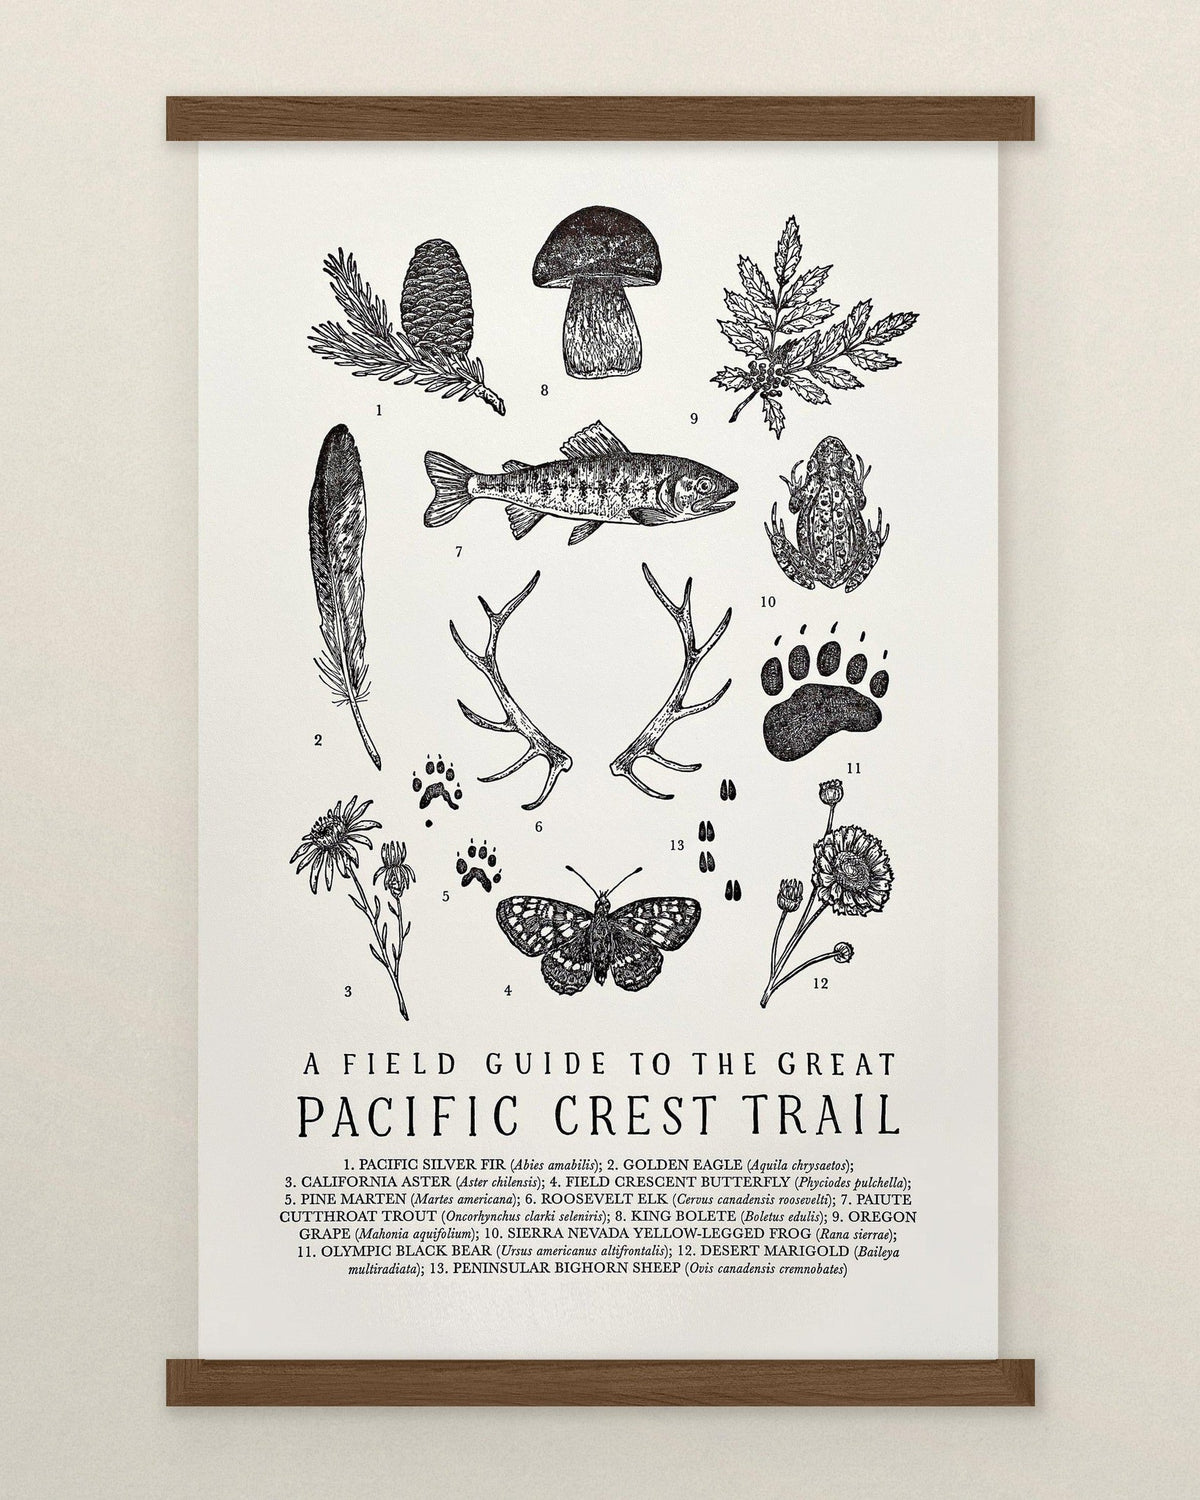 A poster with a Pacific Crest Trail Field Guide Letterpress Print by The Wild Wander.